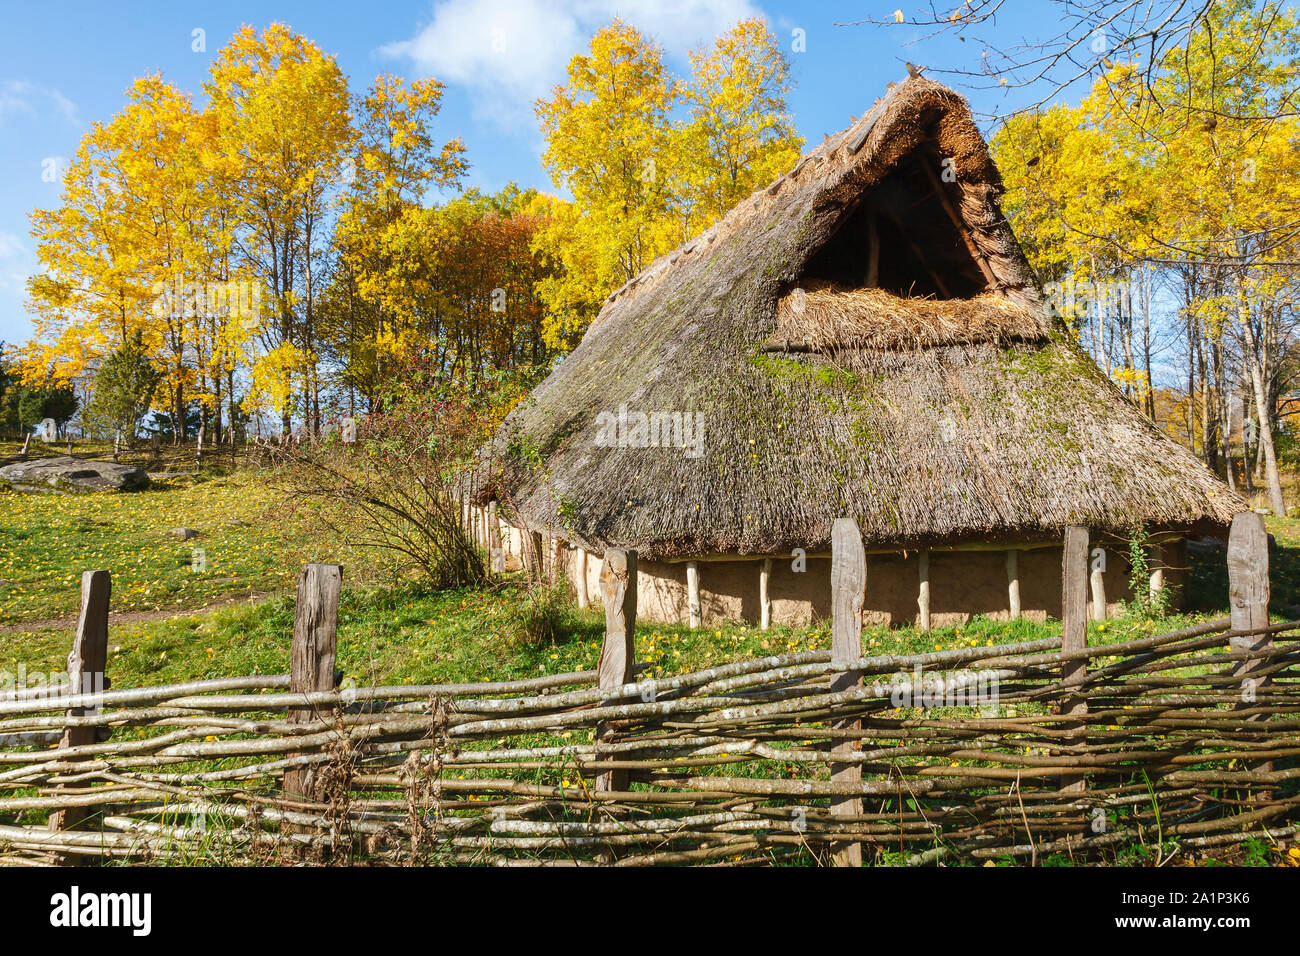 Gabel on a Longhouse in a Autumn Landscape Stock Photo